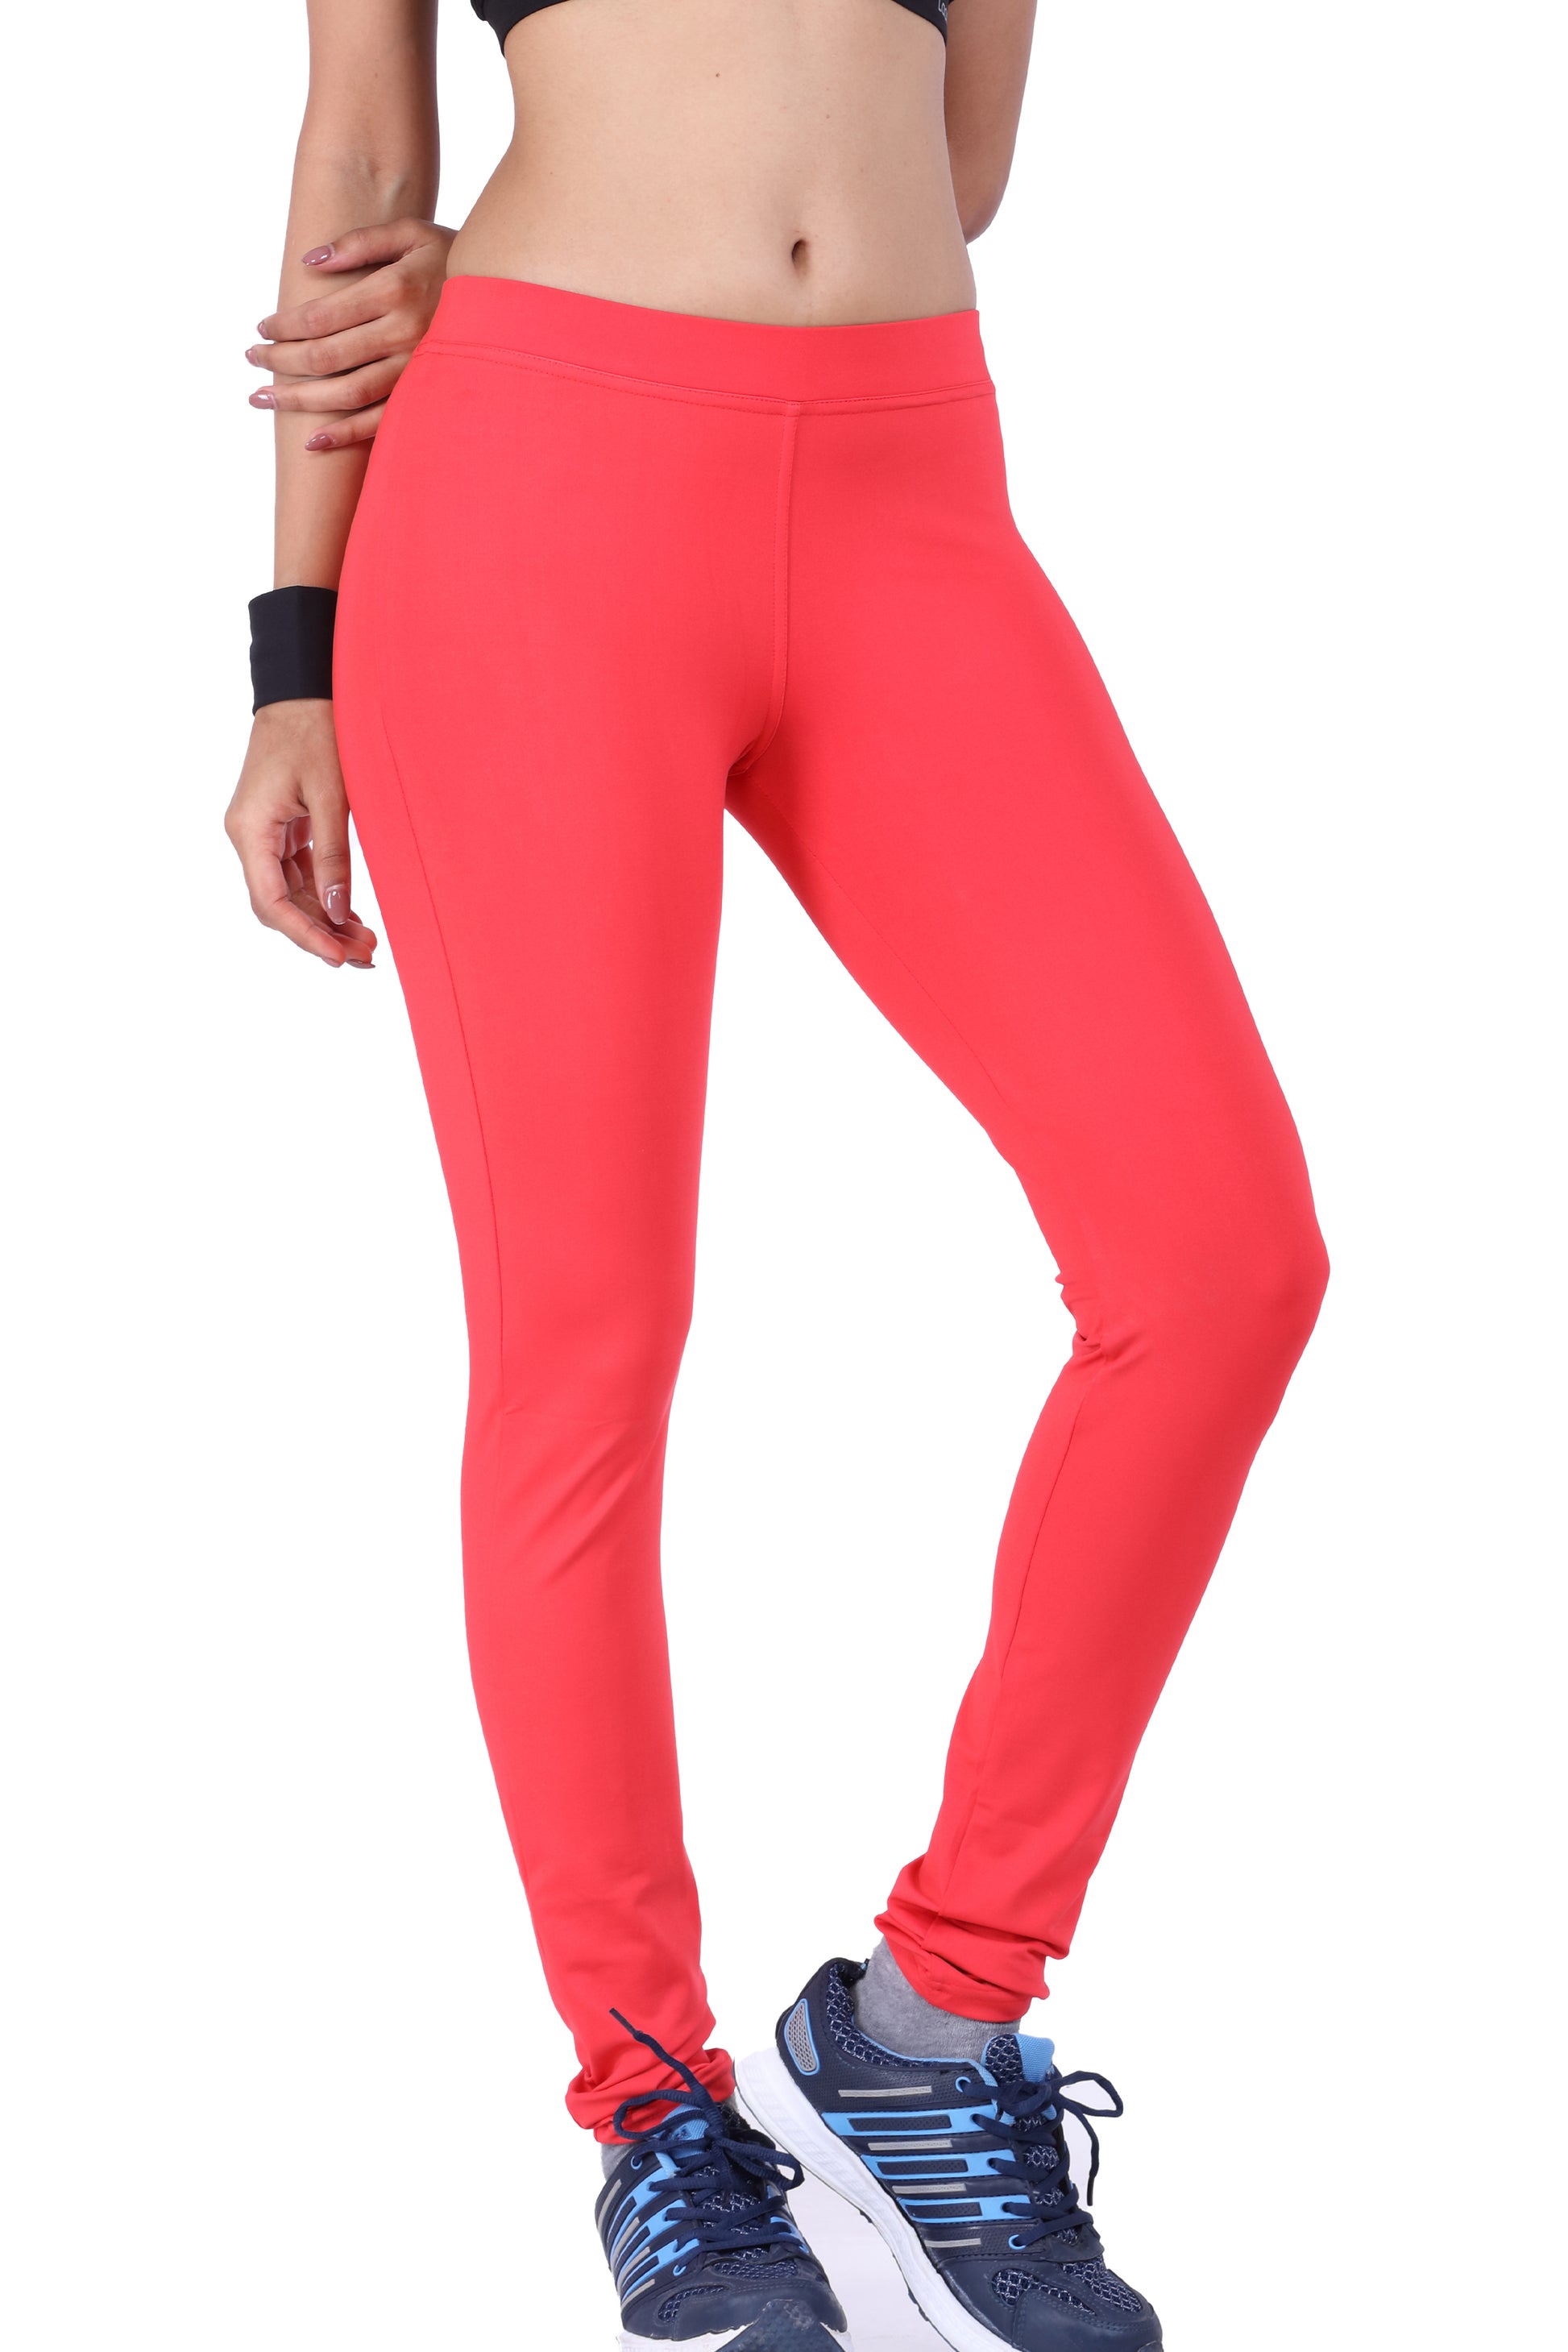 Buy Plus Size Activewear for Women  Plus size track pants – Page 3 – Laasa  Sports